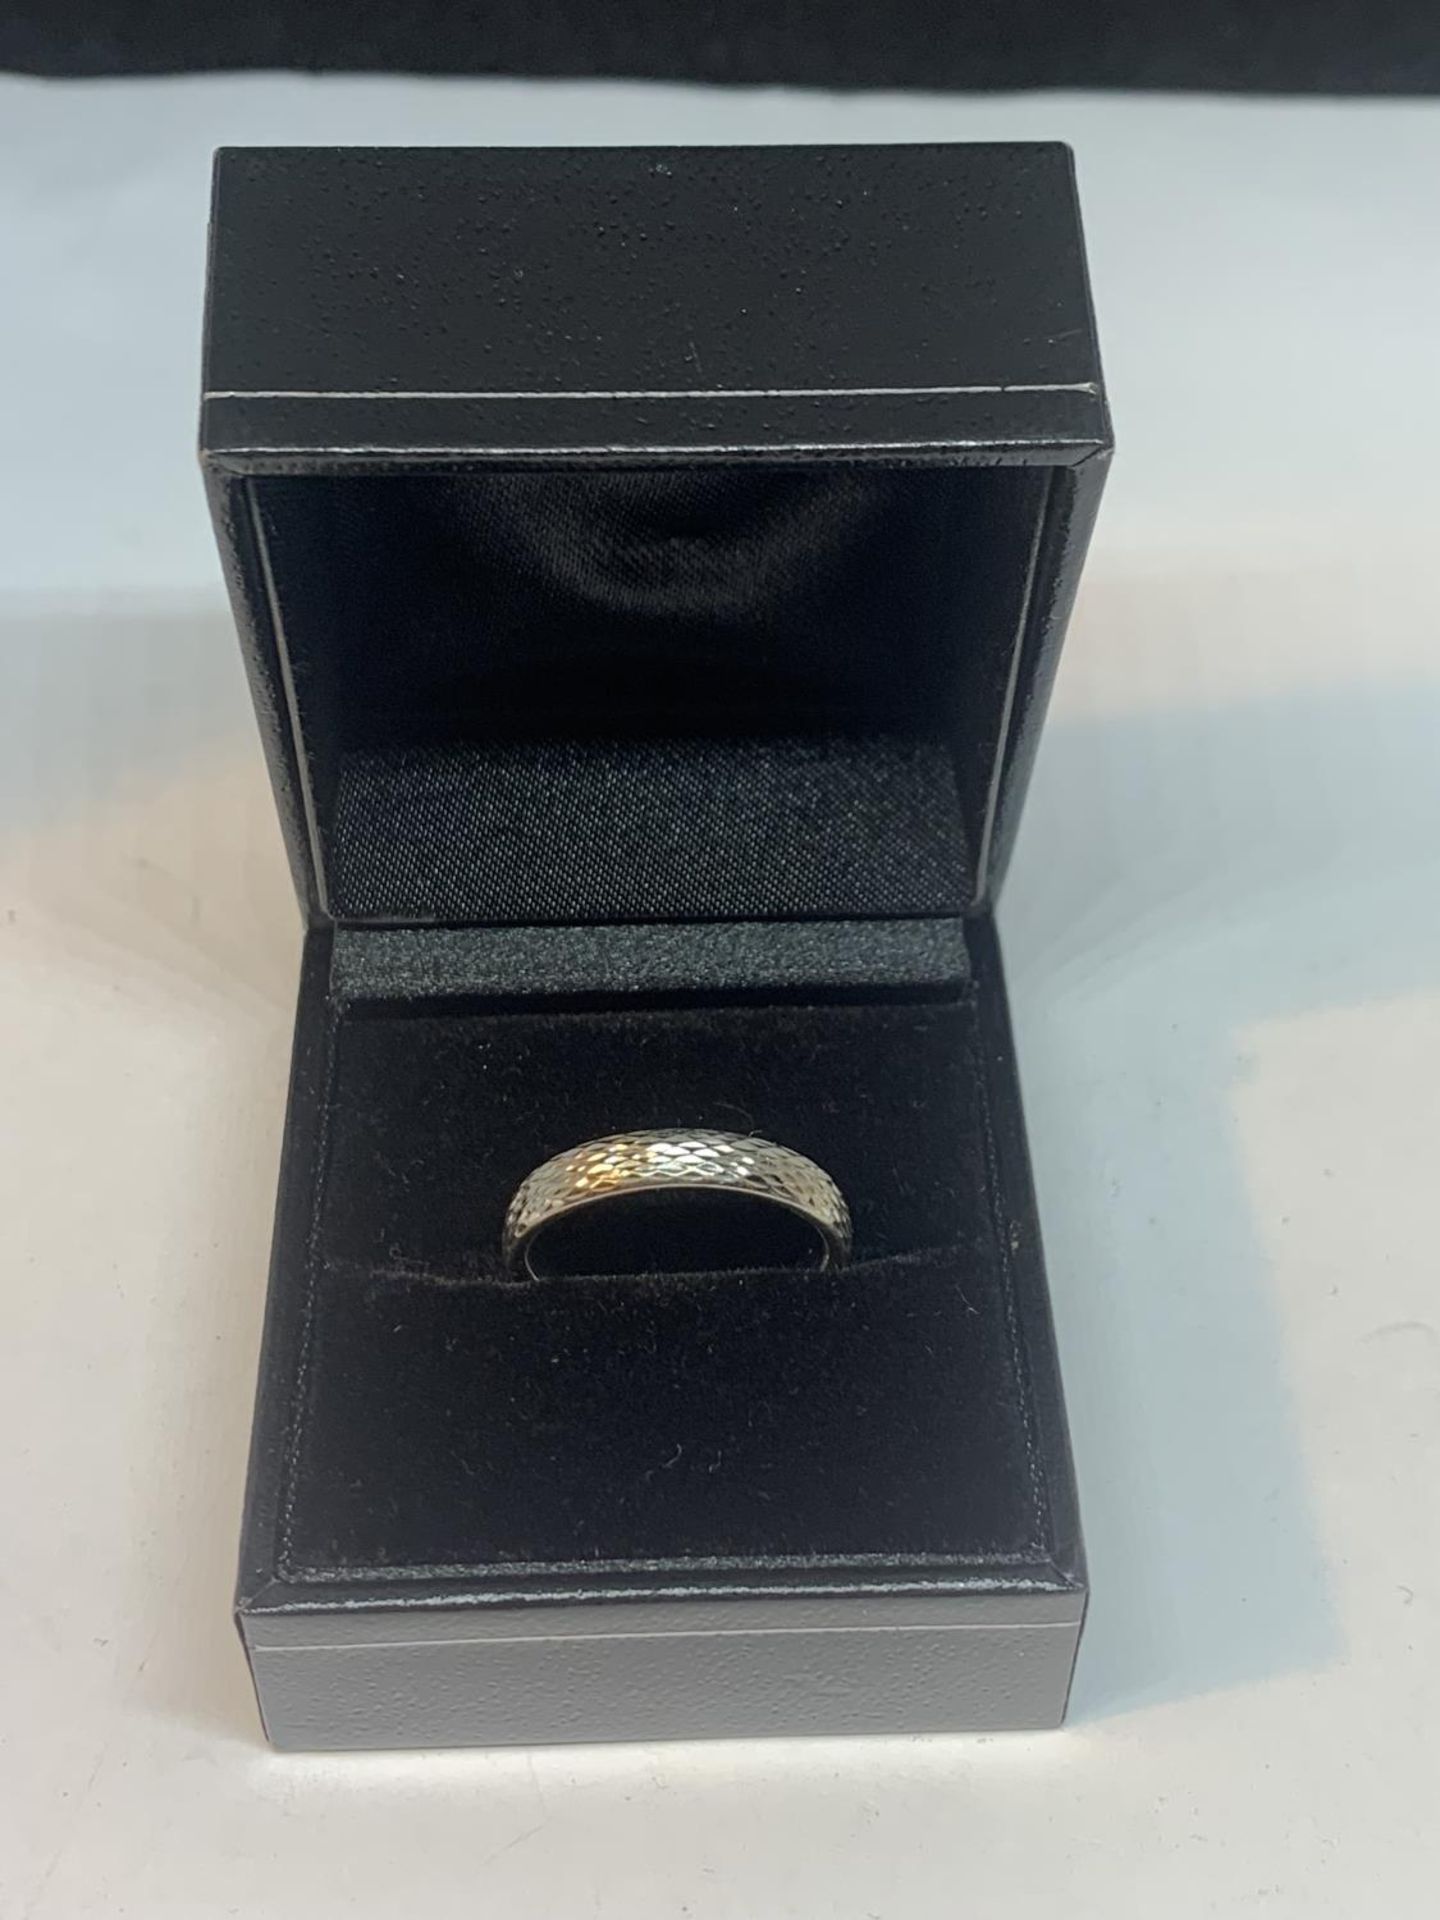 A 9 CARAT WHITE GOLD WEDDING BAND IN A PRESENTATION BOX - Image 2 of 3